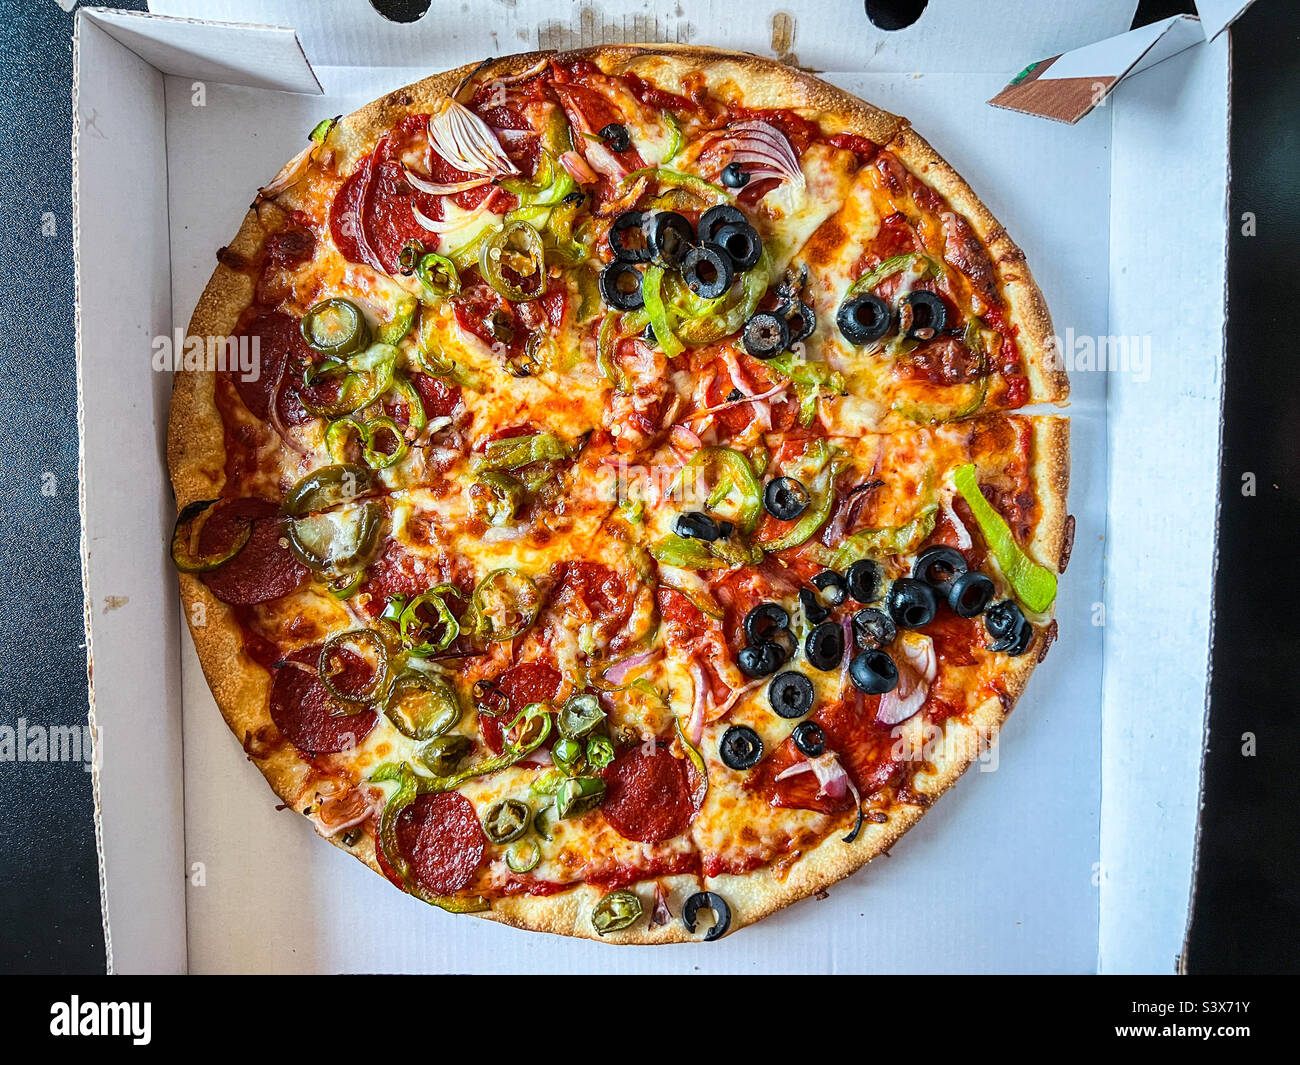 Mixed meat and veggie toppings on takeaway pizza Stock Photo